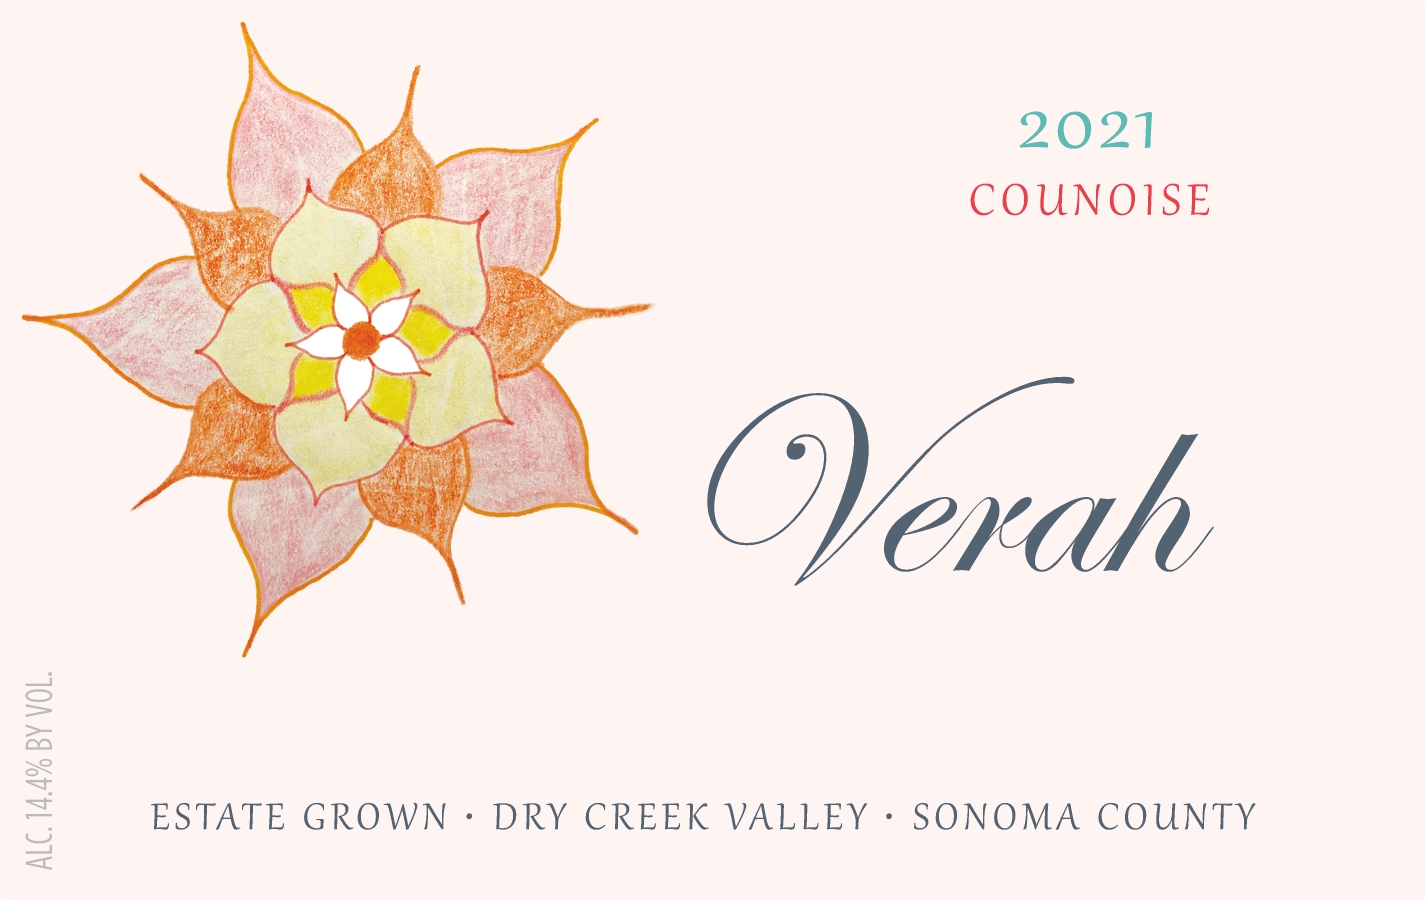 Product Image for 2021 Verah Counoise Estate Grown Dry Creek Valley